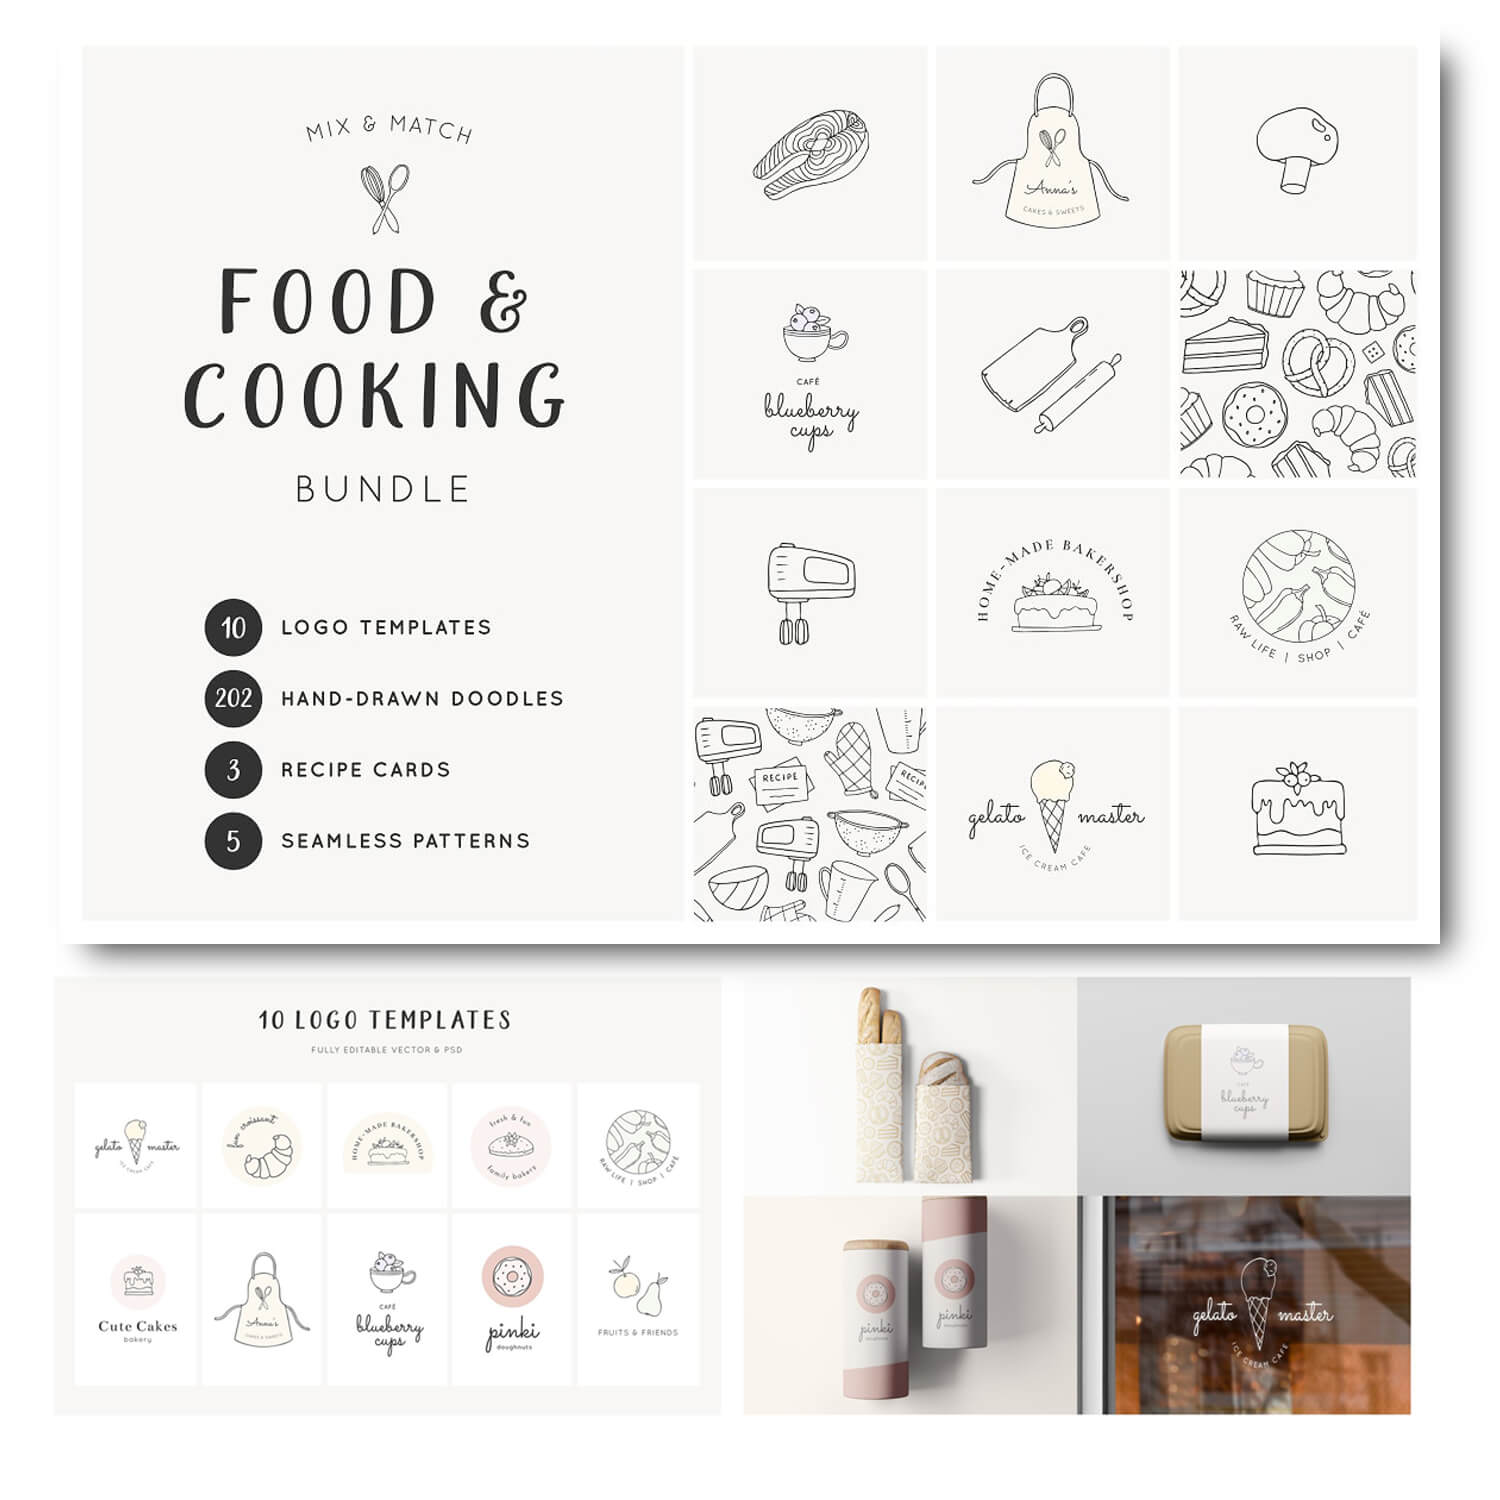 Logo templates of food and cooking.